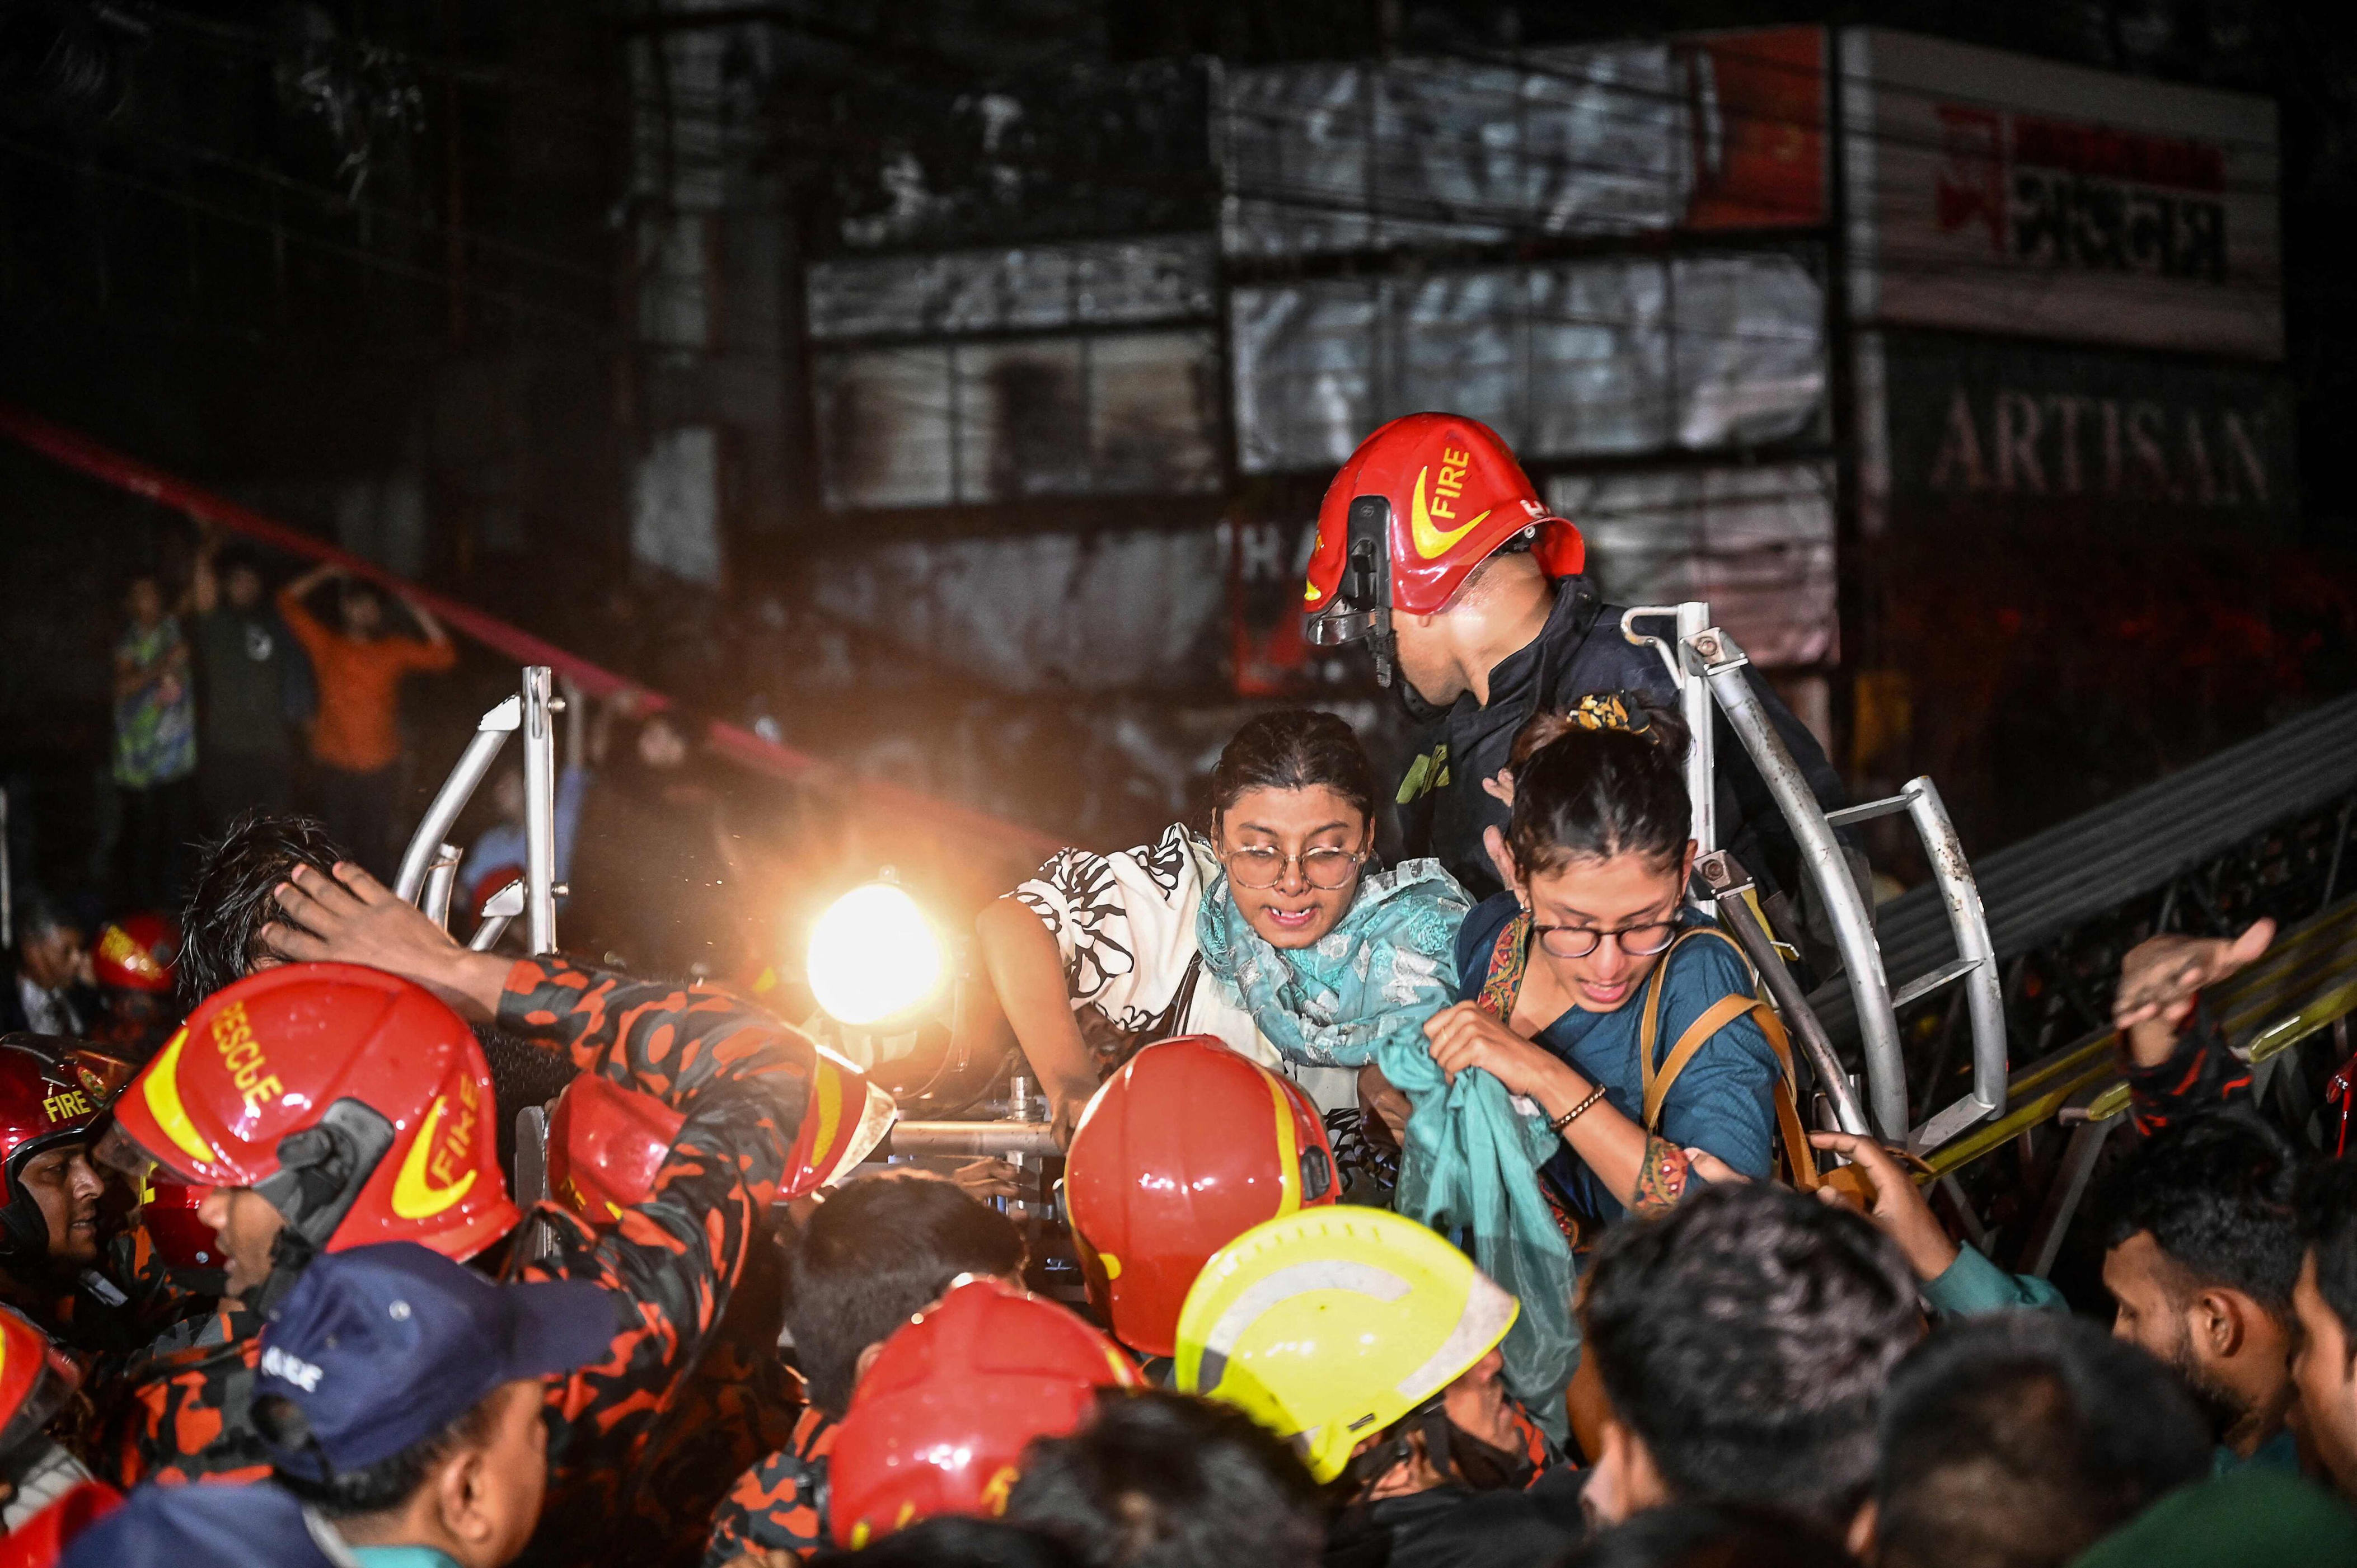 bangladesh building fire: at least 43 people dead as blaze engulfs shopping mall in dhaka